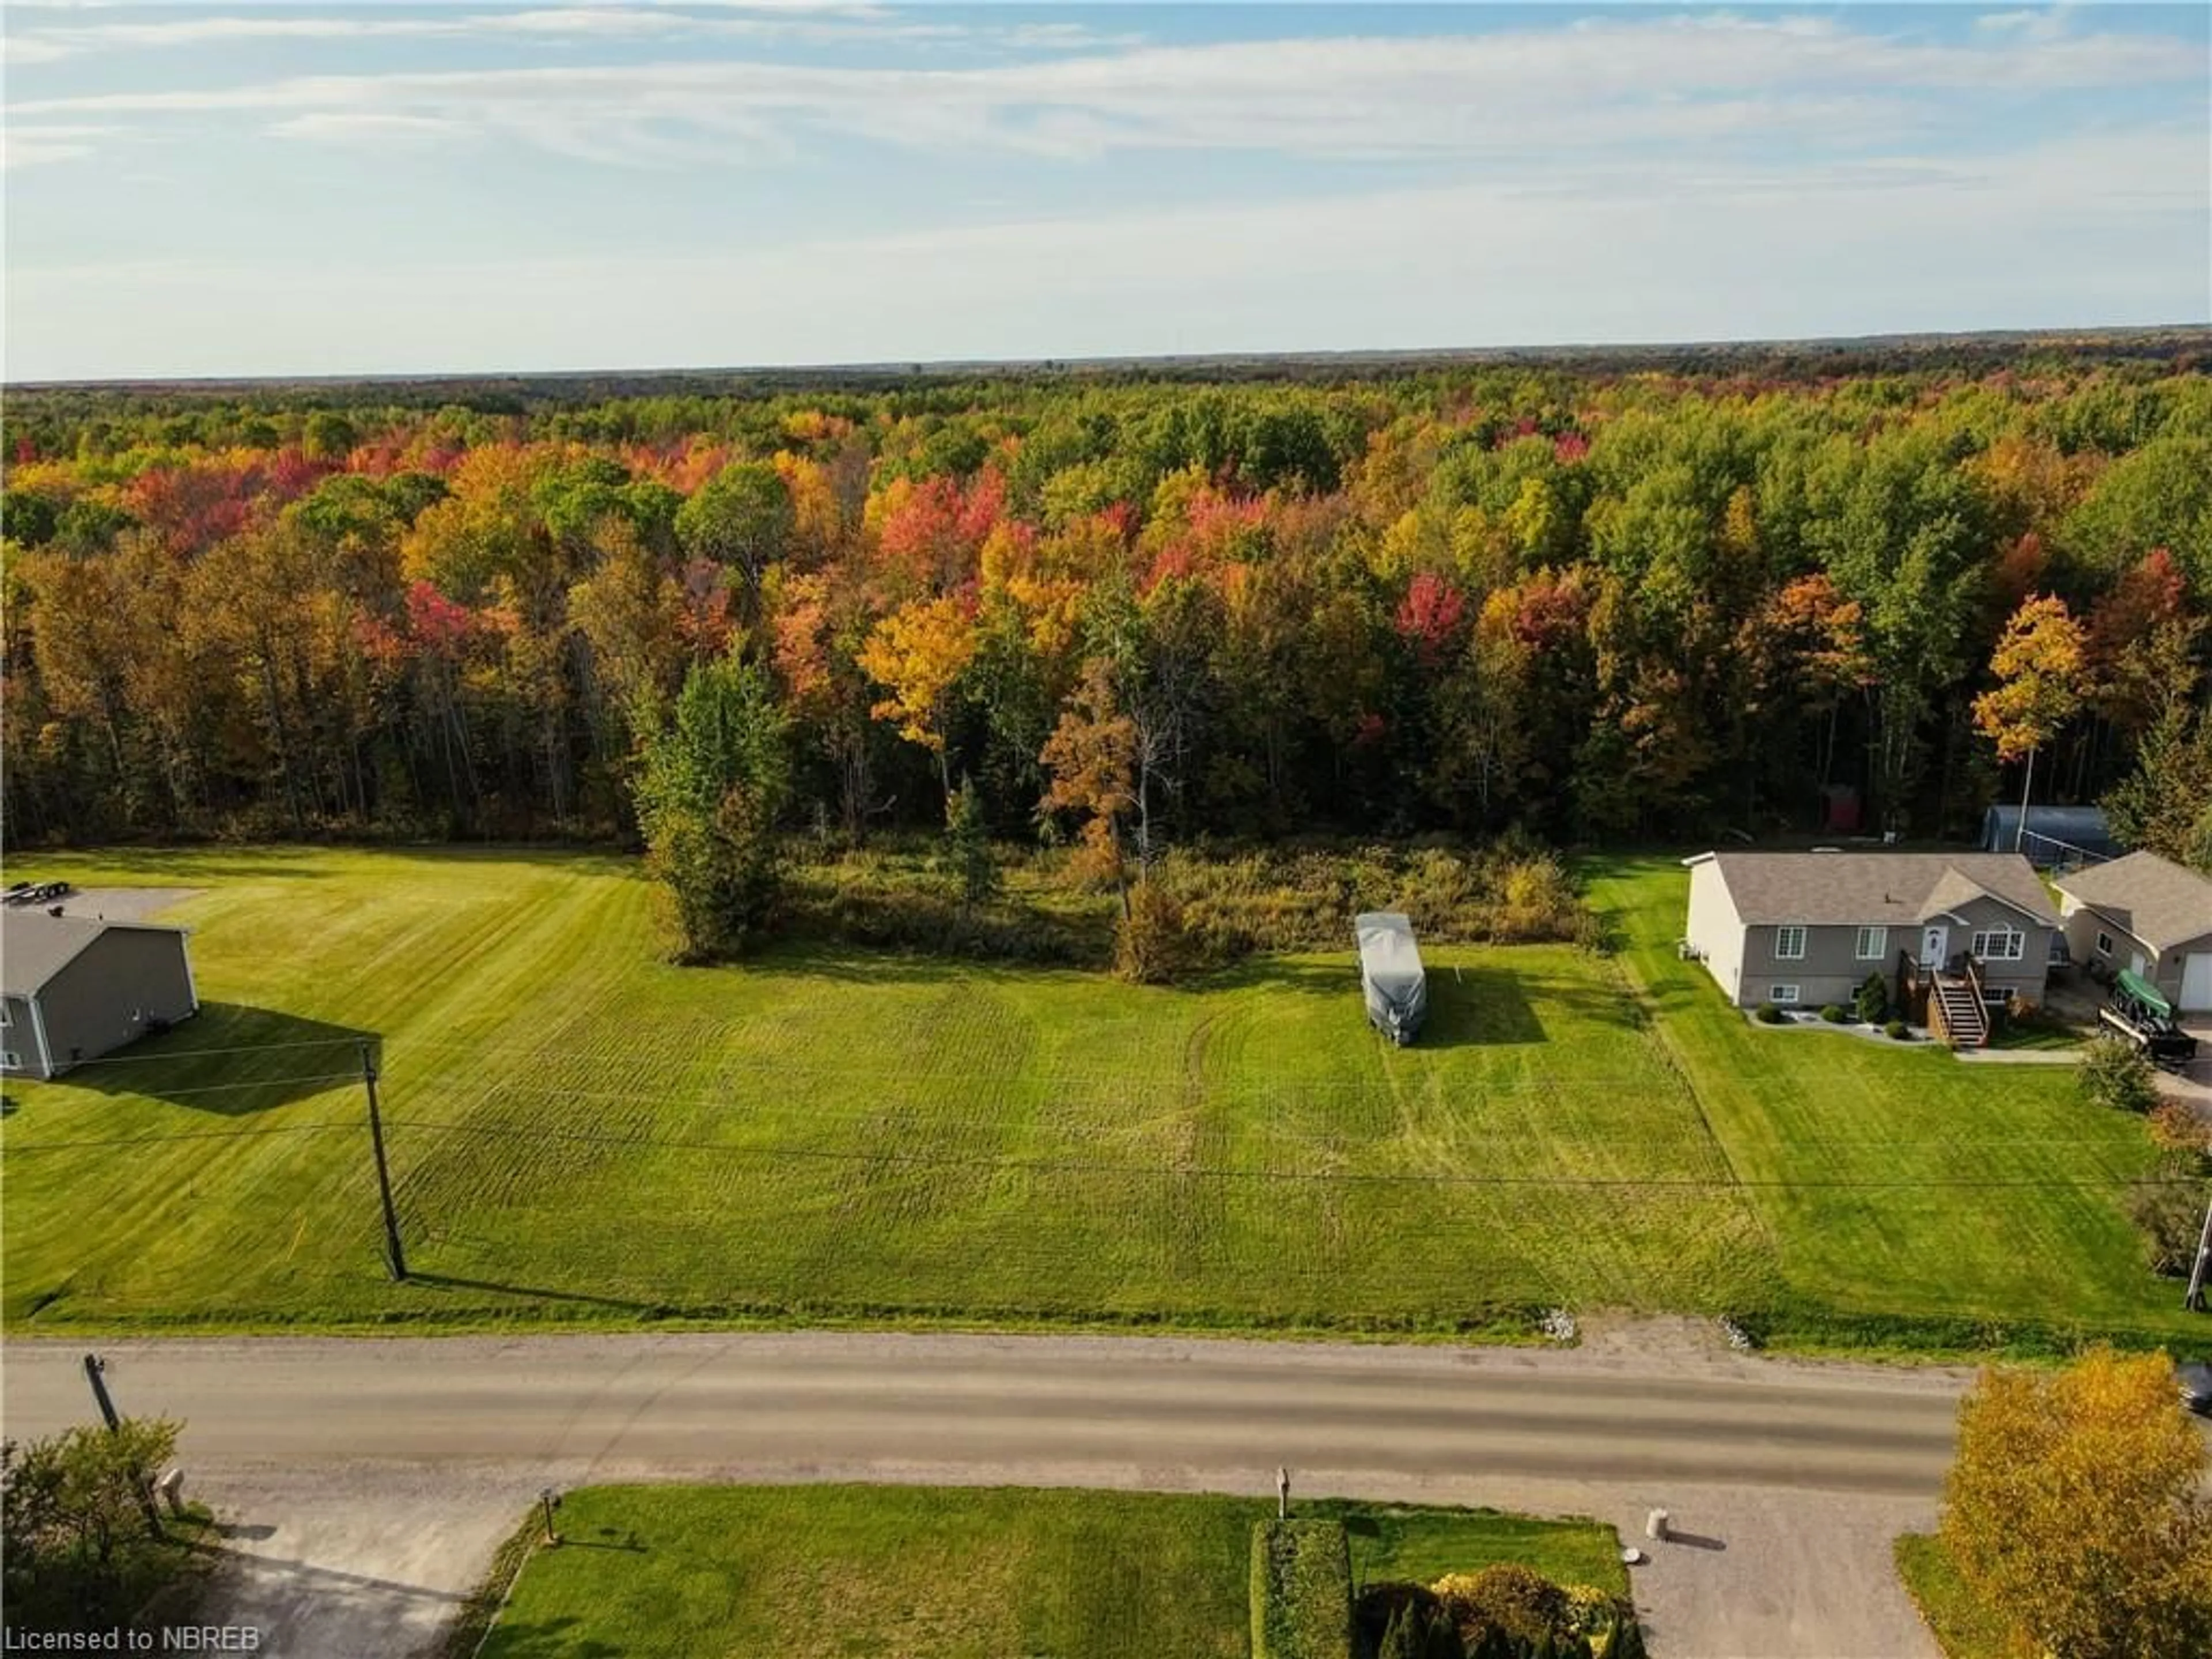 Lakeview for LOT 10 Delorme Rd, Sturgeon Falls Ontario P2B 2M9